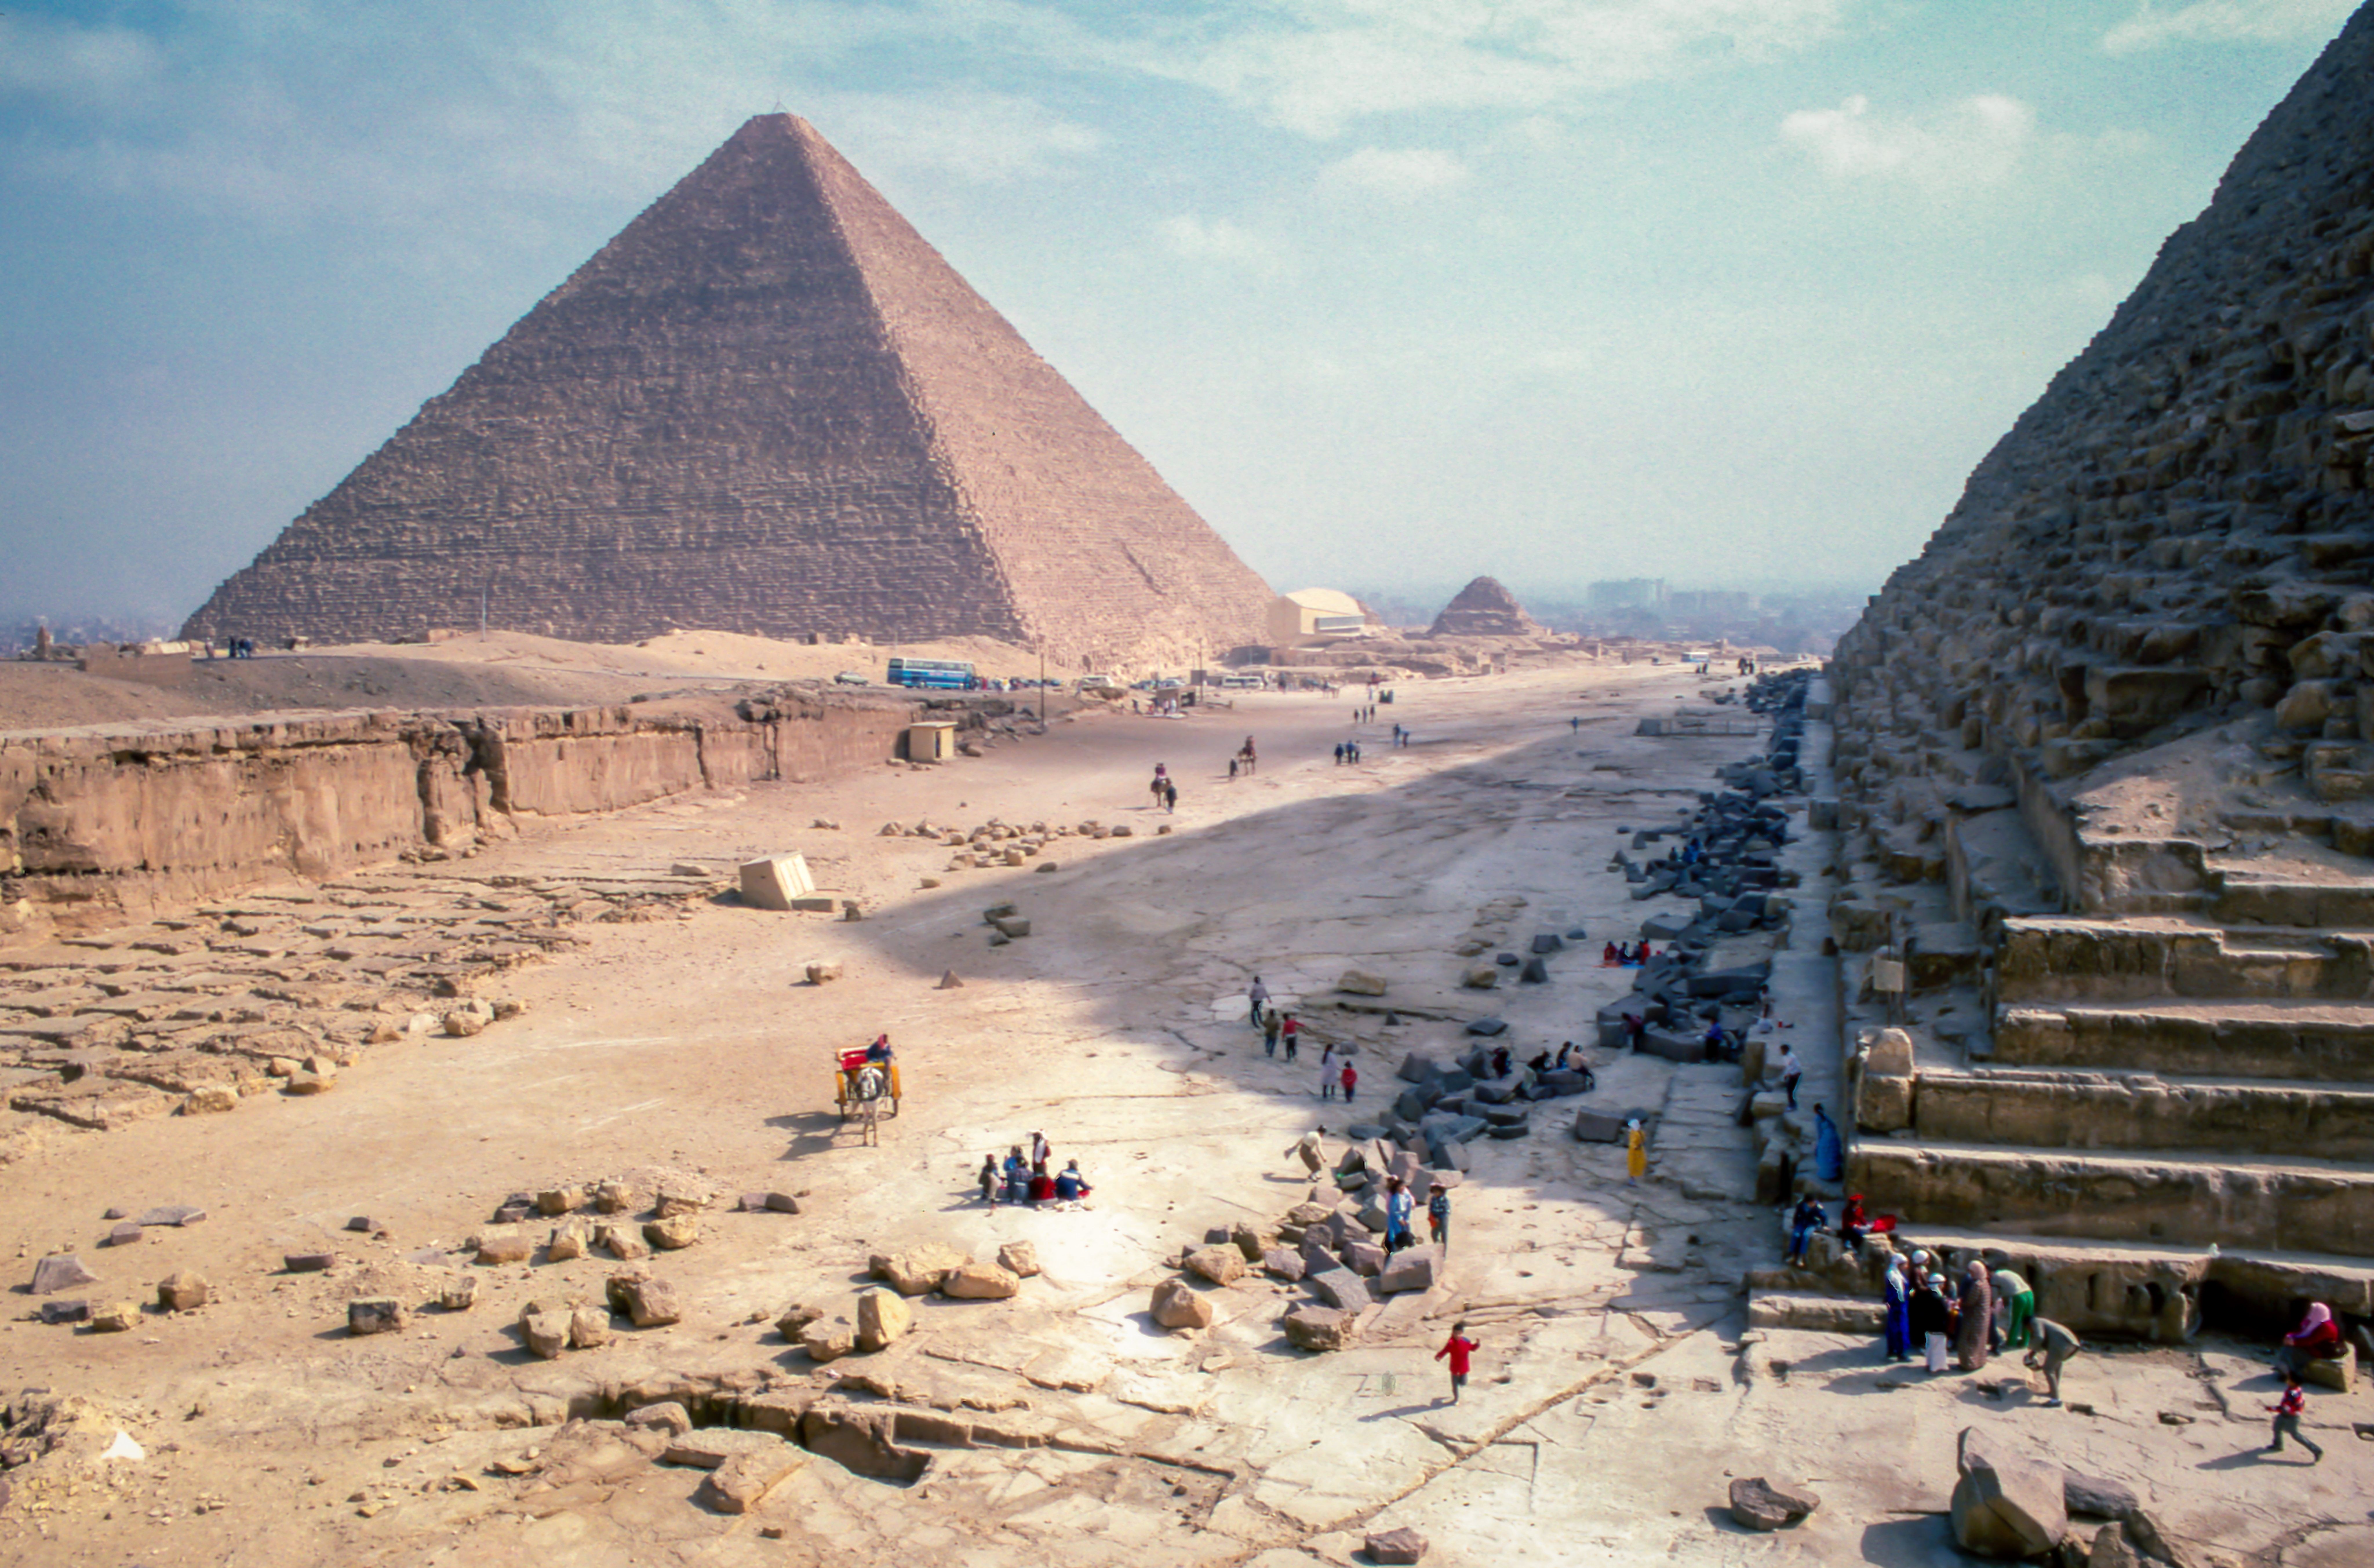 Flight Deal: Prices To Cairo Are Super Cheap Right Now